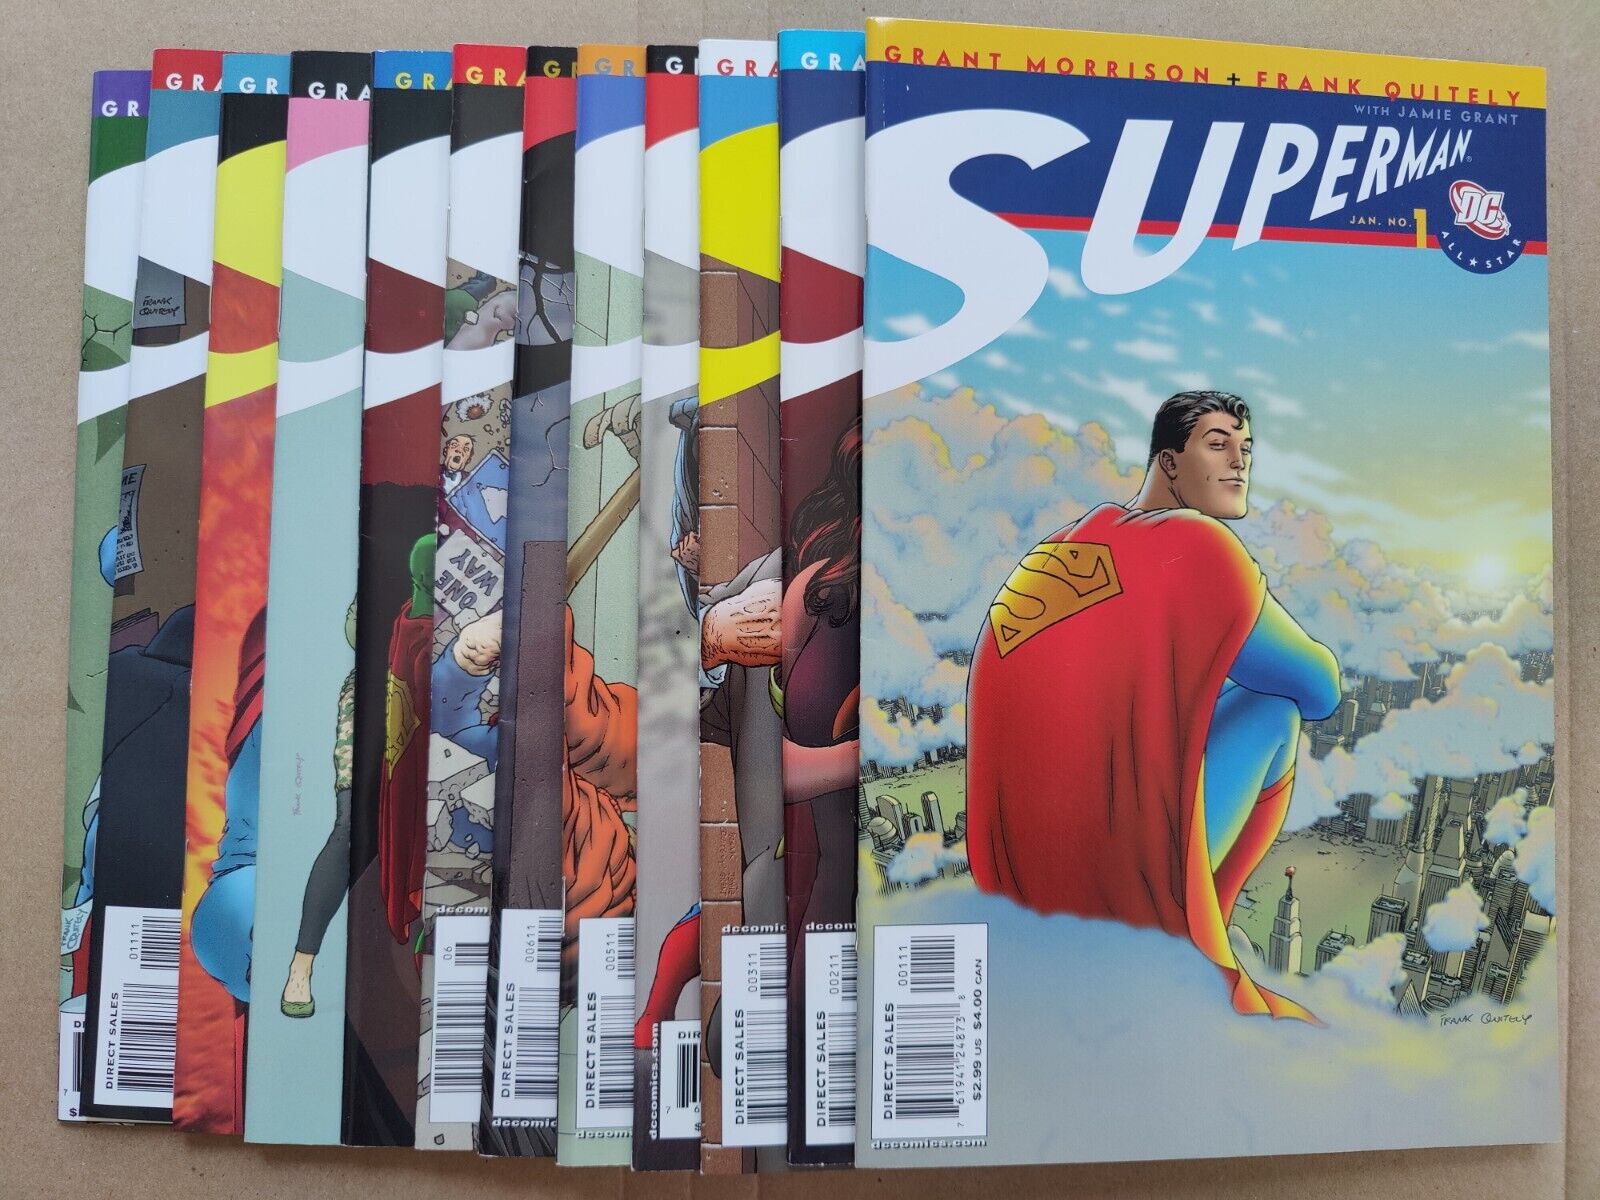 DC All-Star Superman 1-12 Complete 2006 Morrison Frank Quitely VF To NM (2)